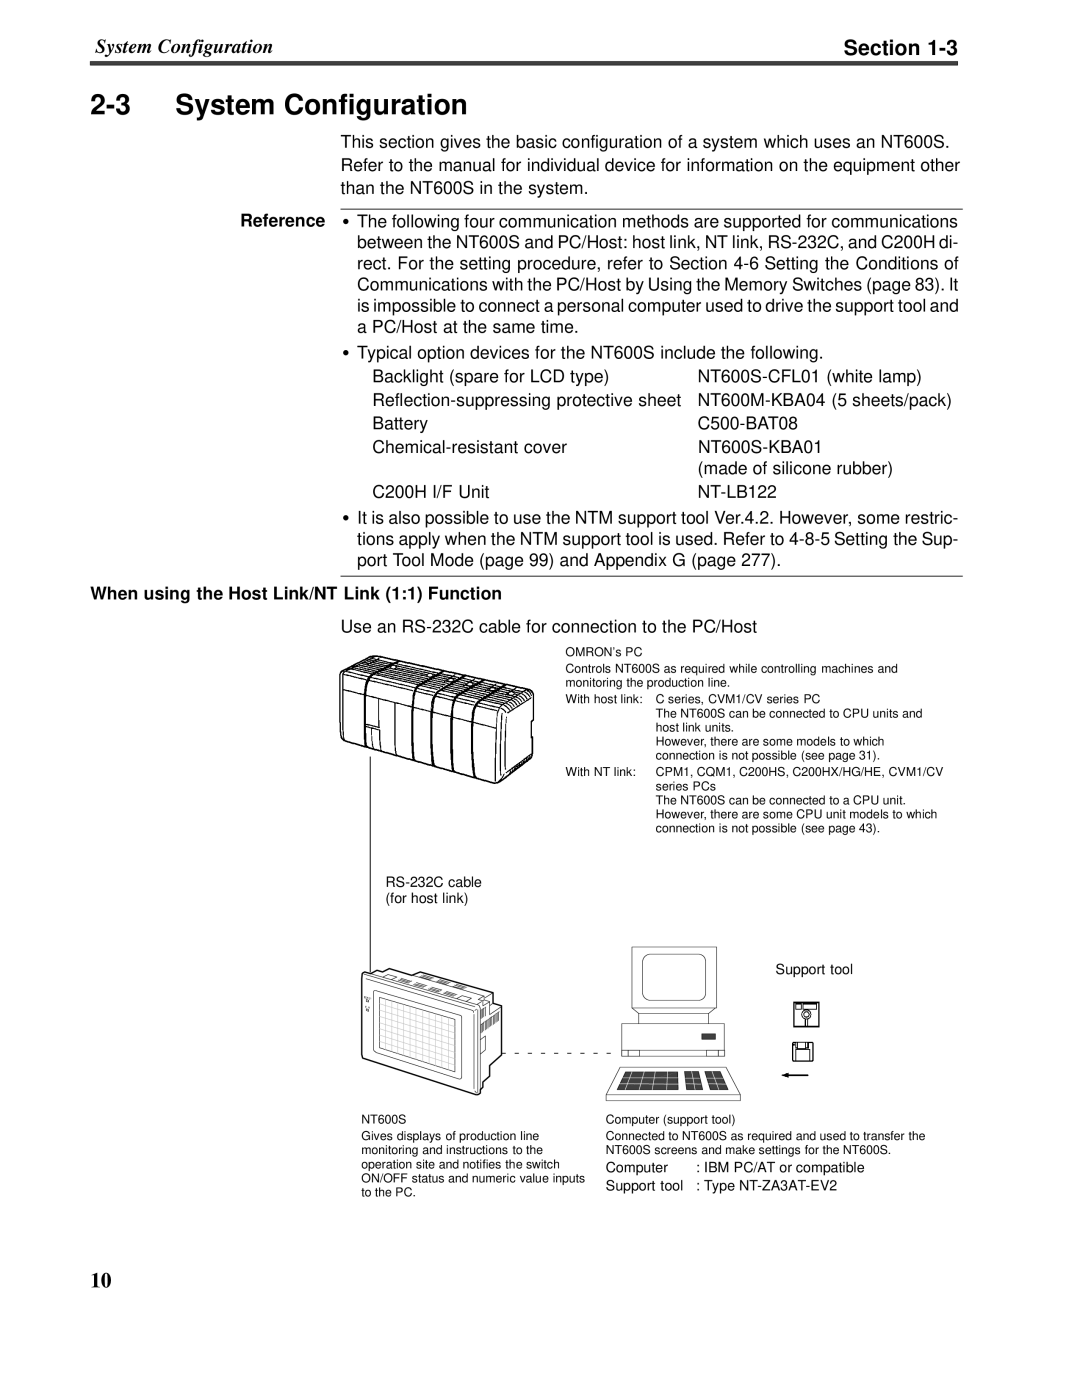 Omron V022-E3-1 operation manual 2-3System Configuration, Section, When using the Host Link/NT Link 1:1 Function 